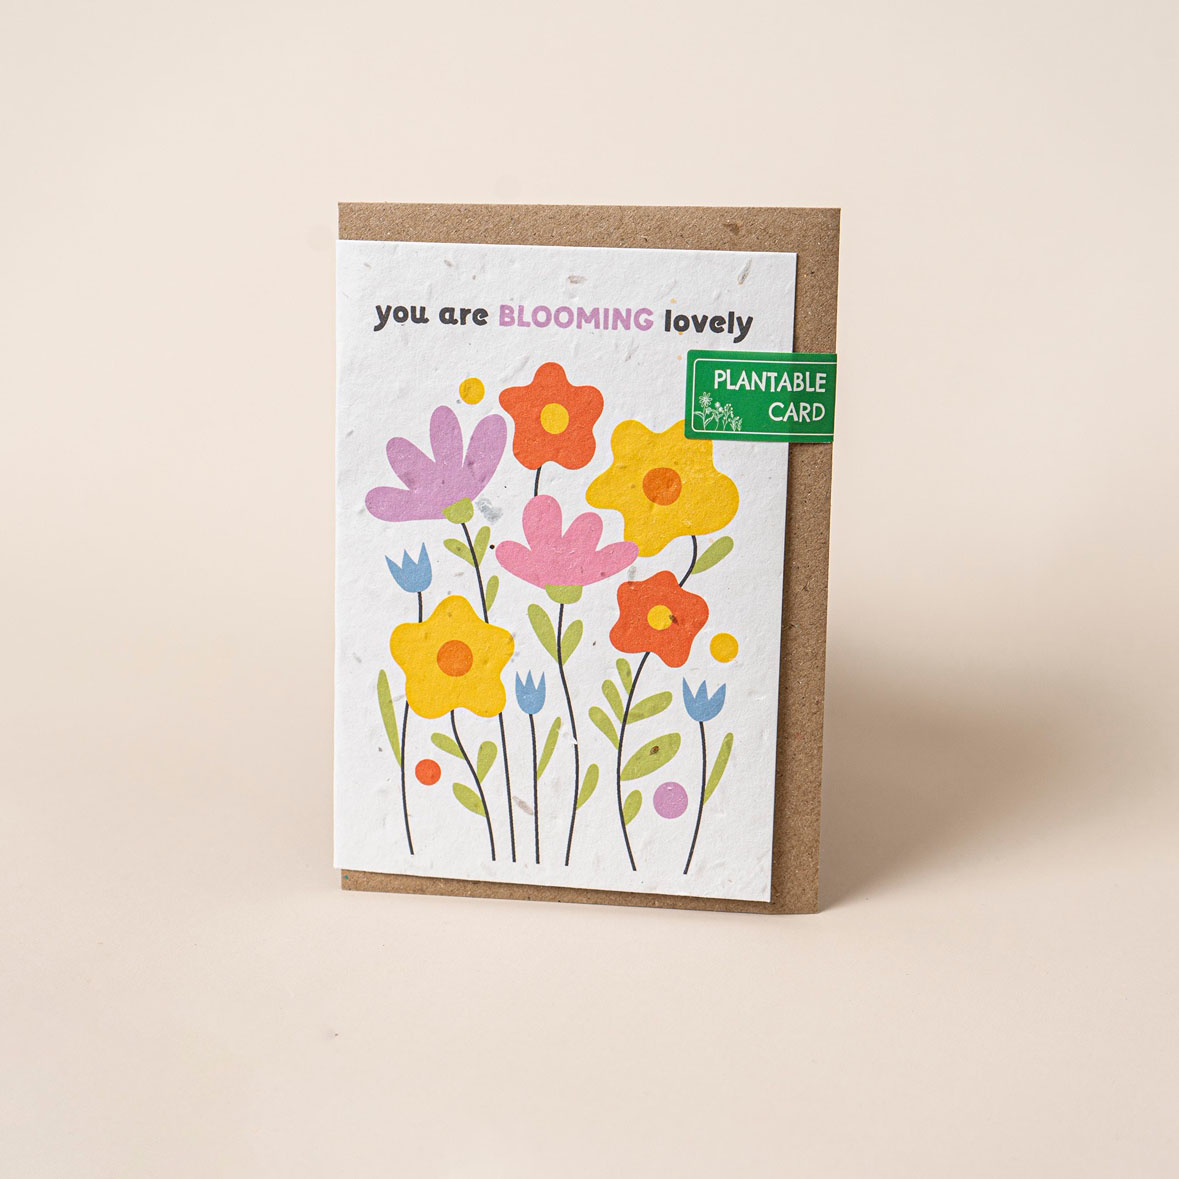 NEW! Plantable Wildflower Greetings Cards – willsow